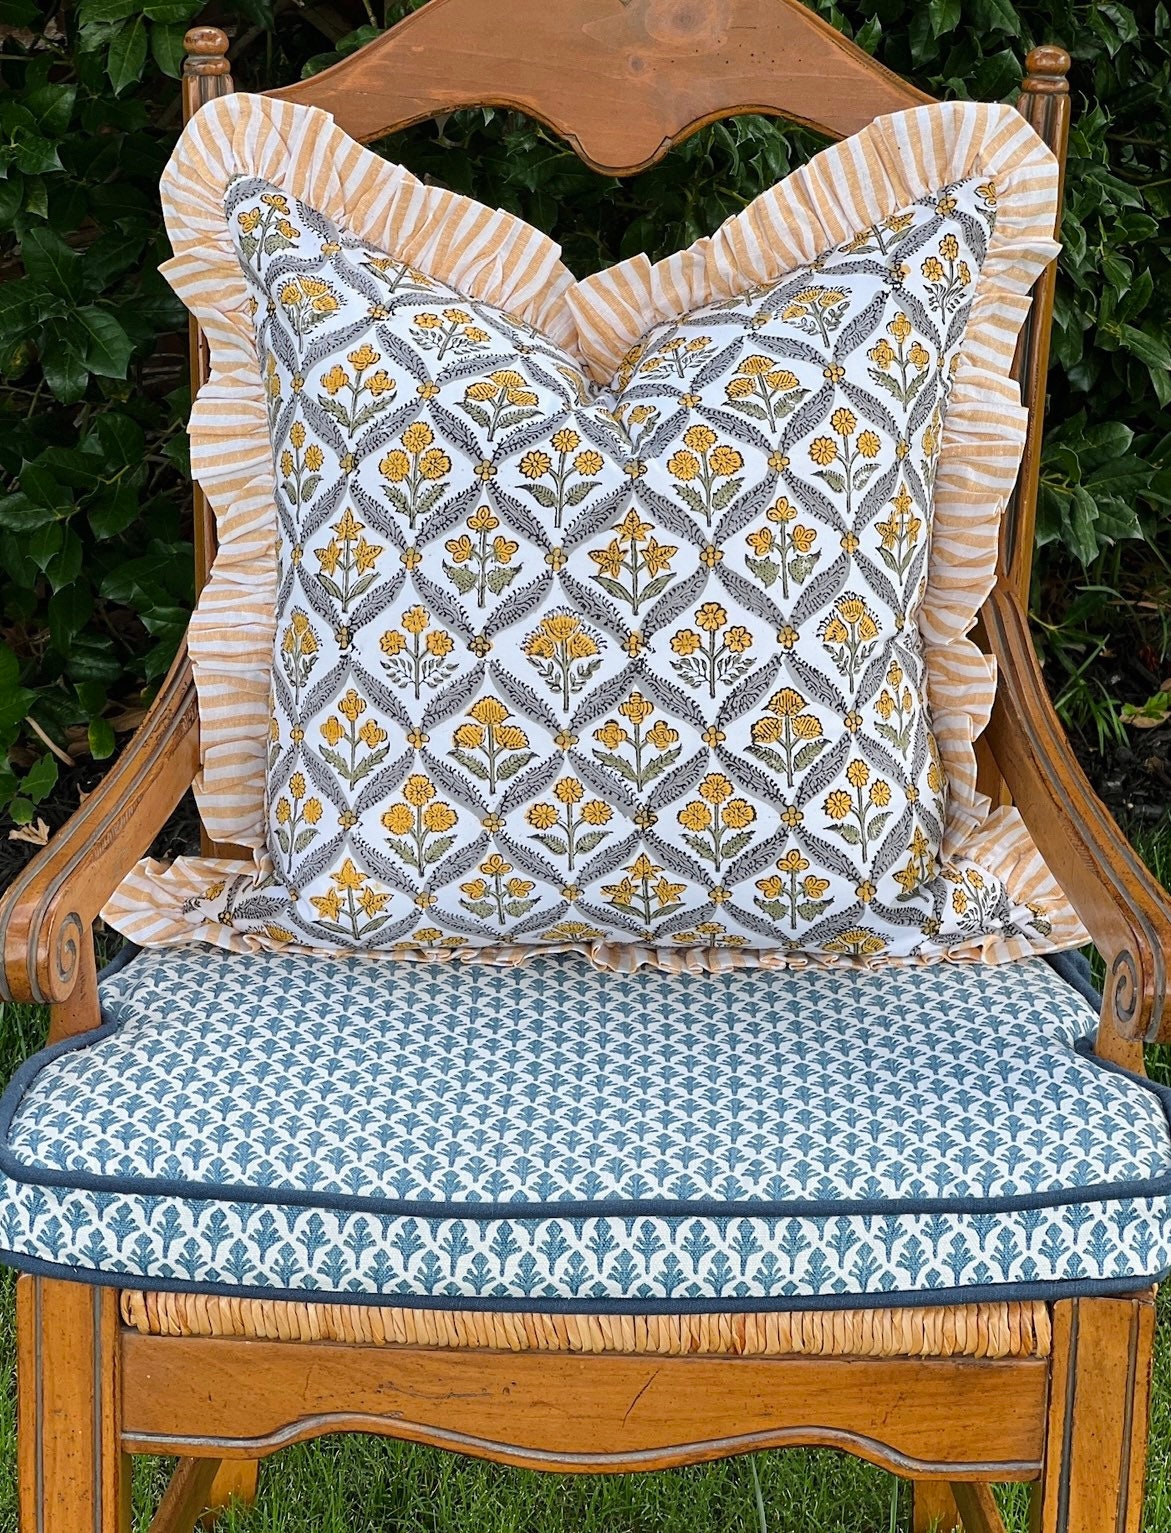 Yellow block print pillow cover with ruffle trim